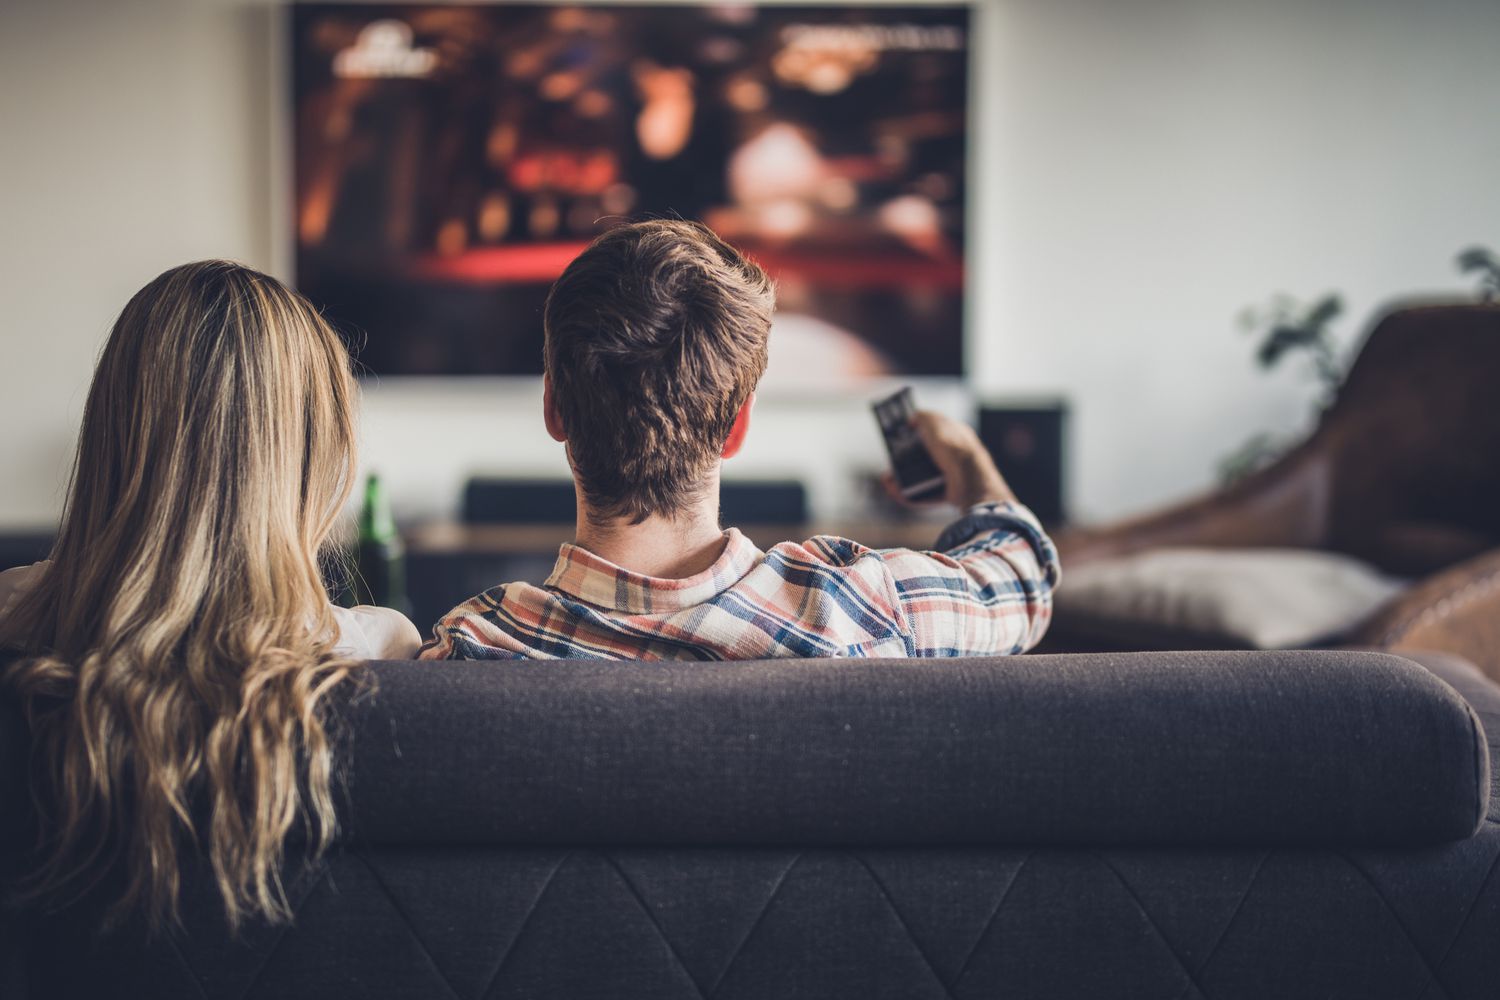 How Do Movies And Television Influence People’s Behavior